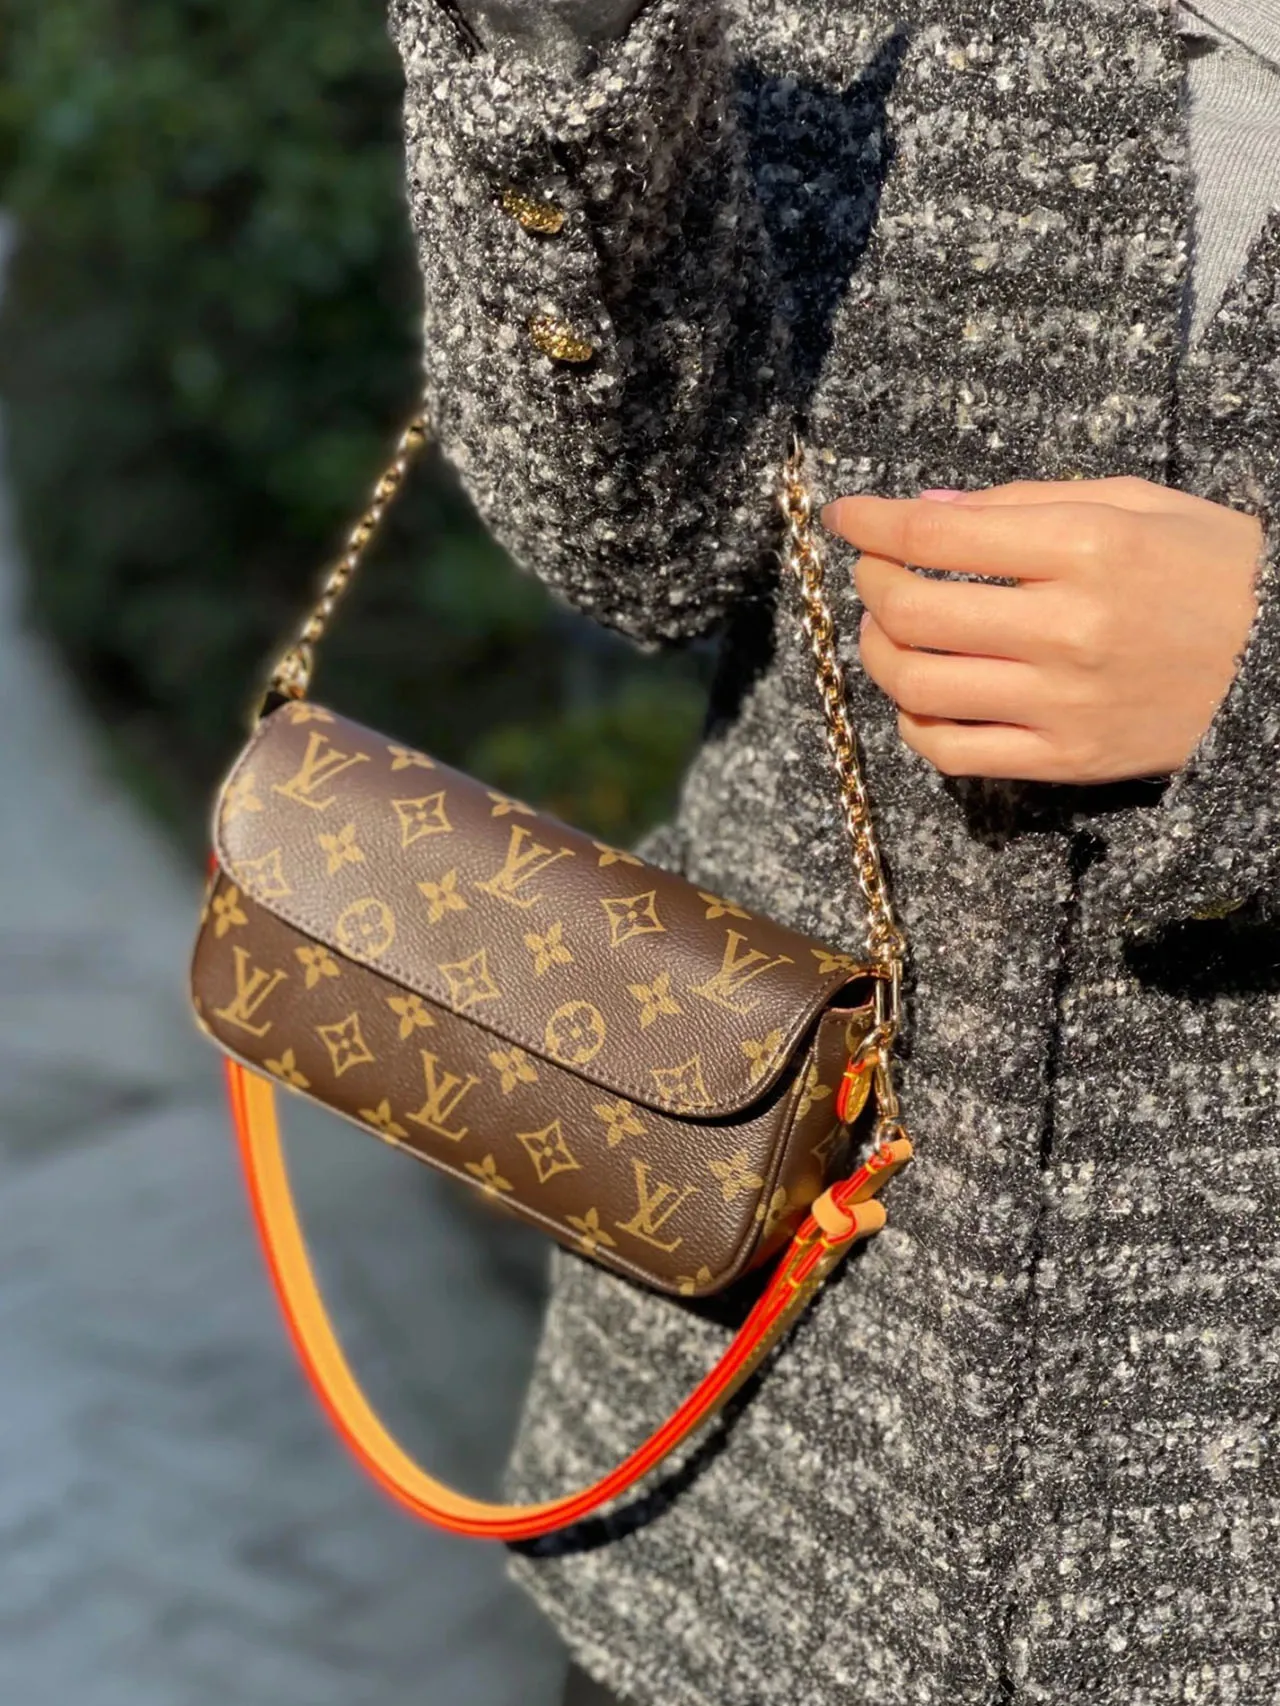 Lv ivy woc, Gallery posted by banyu_yi